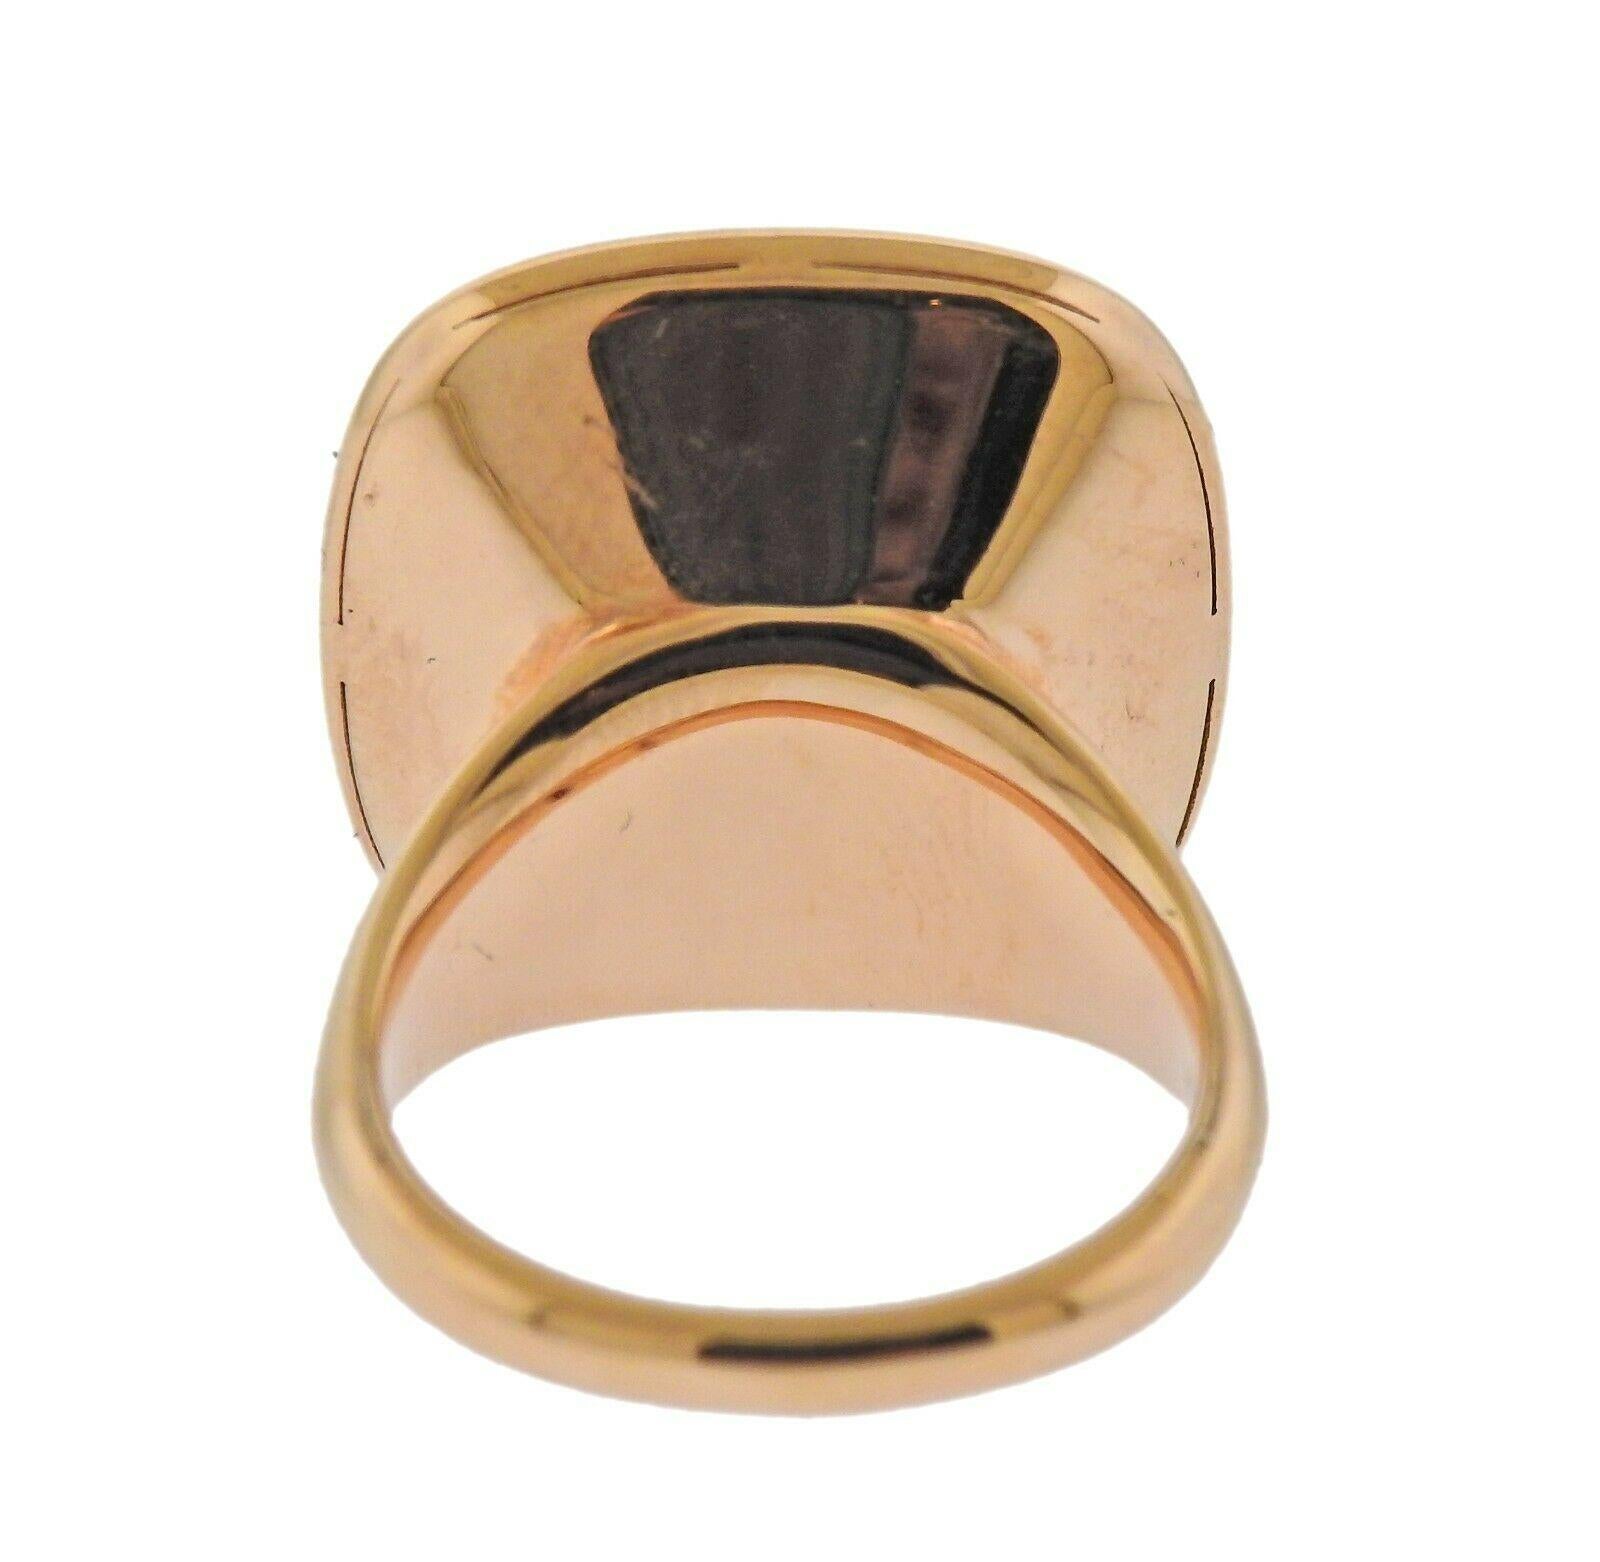 18k rose gold ring, crafted by Roberto Coin. Set with approx 0.65ctw of diamonds, and black jade. Measurements - Ring size - 7, ring top - 20mm x 20mm. Marked- RC, Ruby mark, 18kt. Weight- 10.1 grams. 


